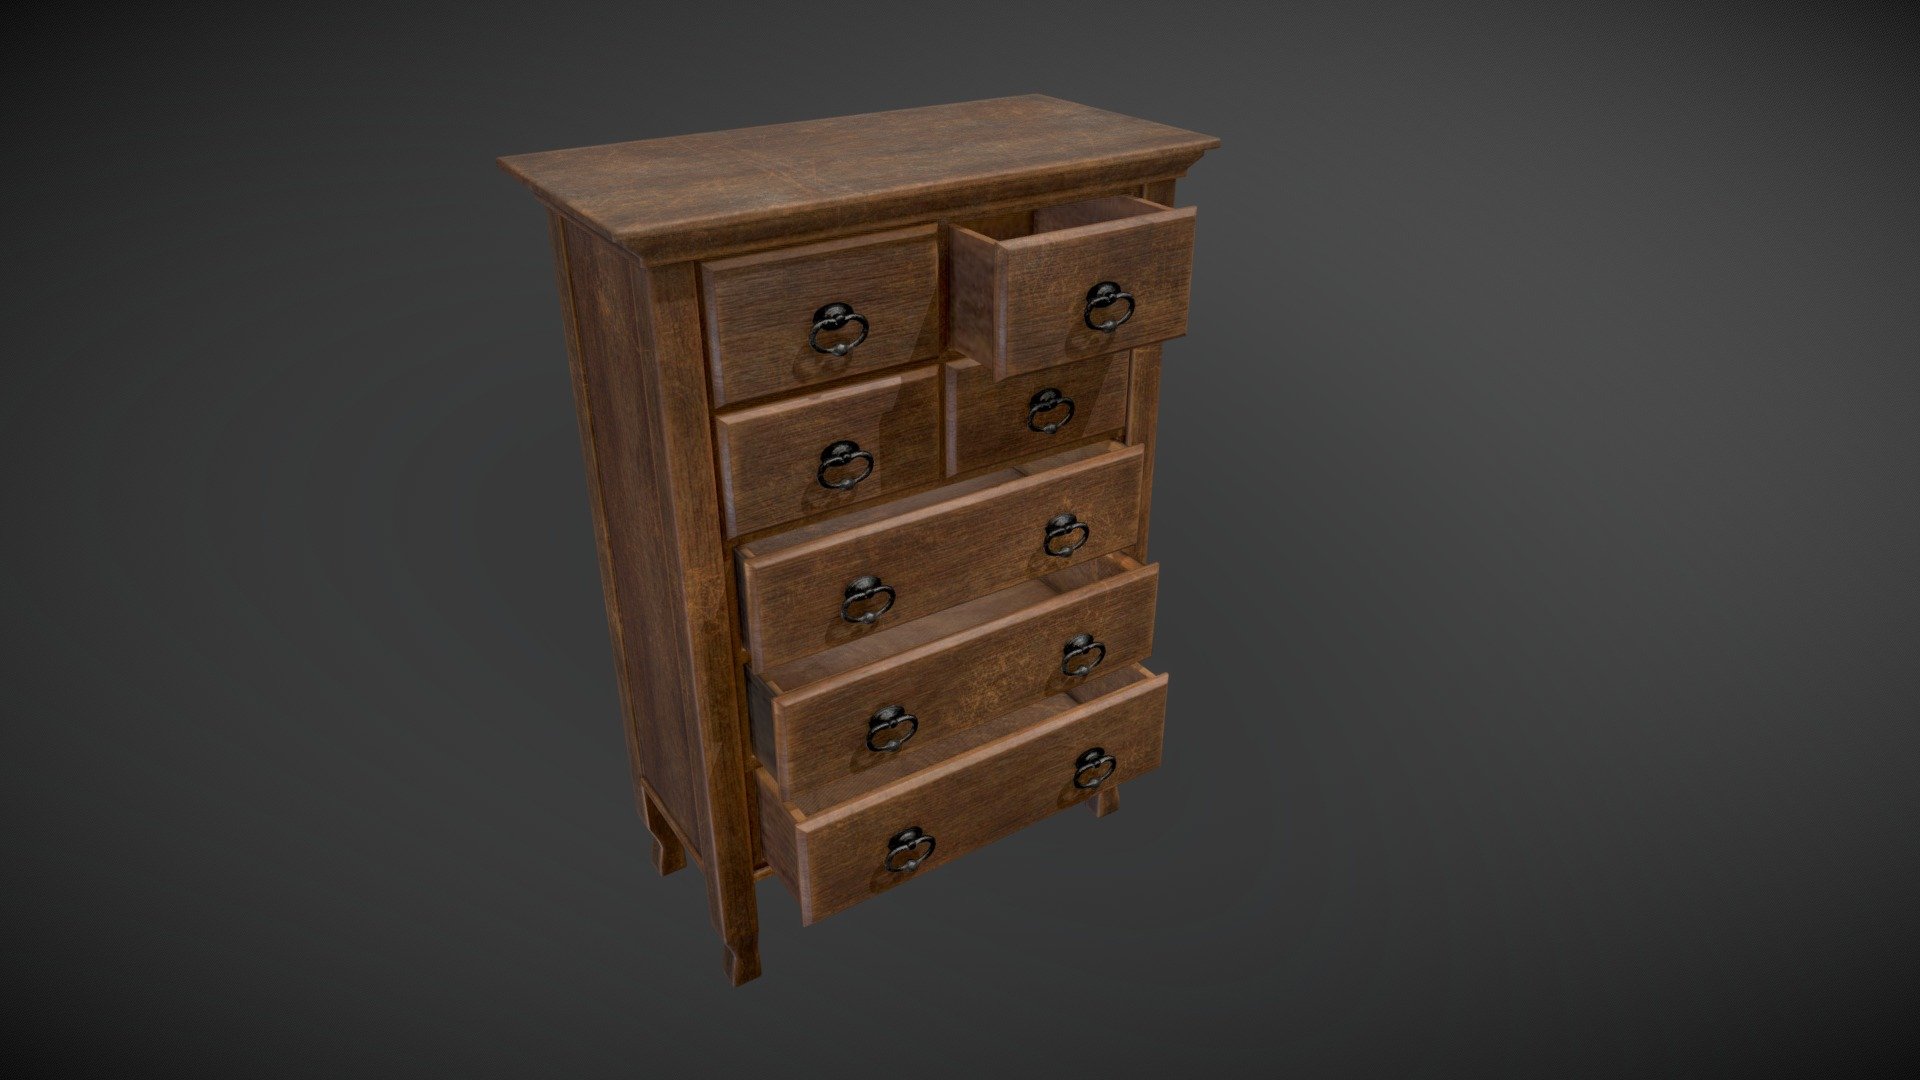 An old slighty used dresser with movable drawers for your environment szene.

Includes 1K and 2K texture sets (Albedo, Roughness, Metalness, AO, Normal) 3d model